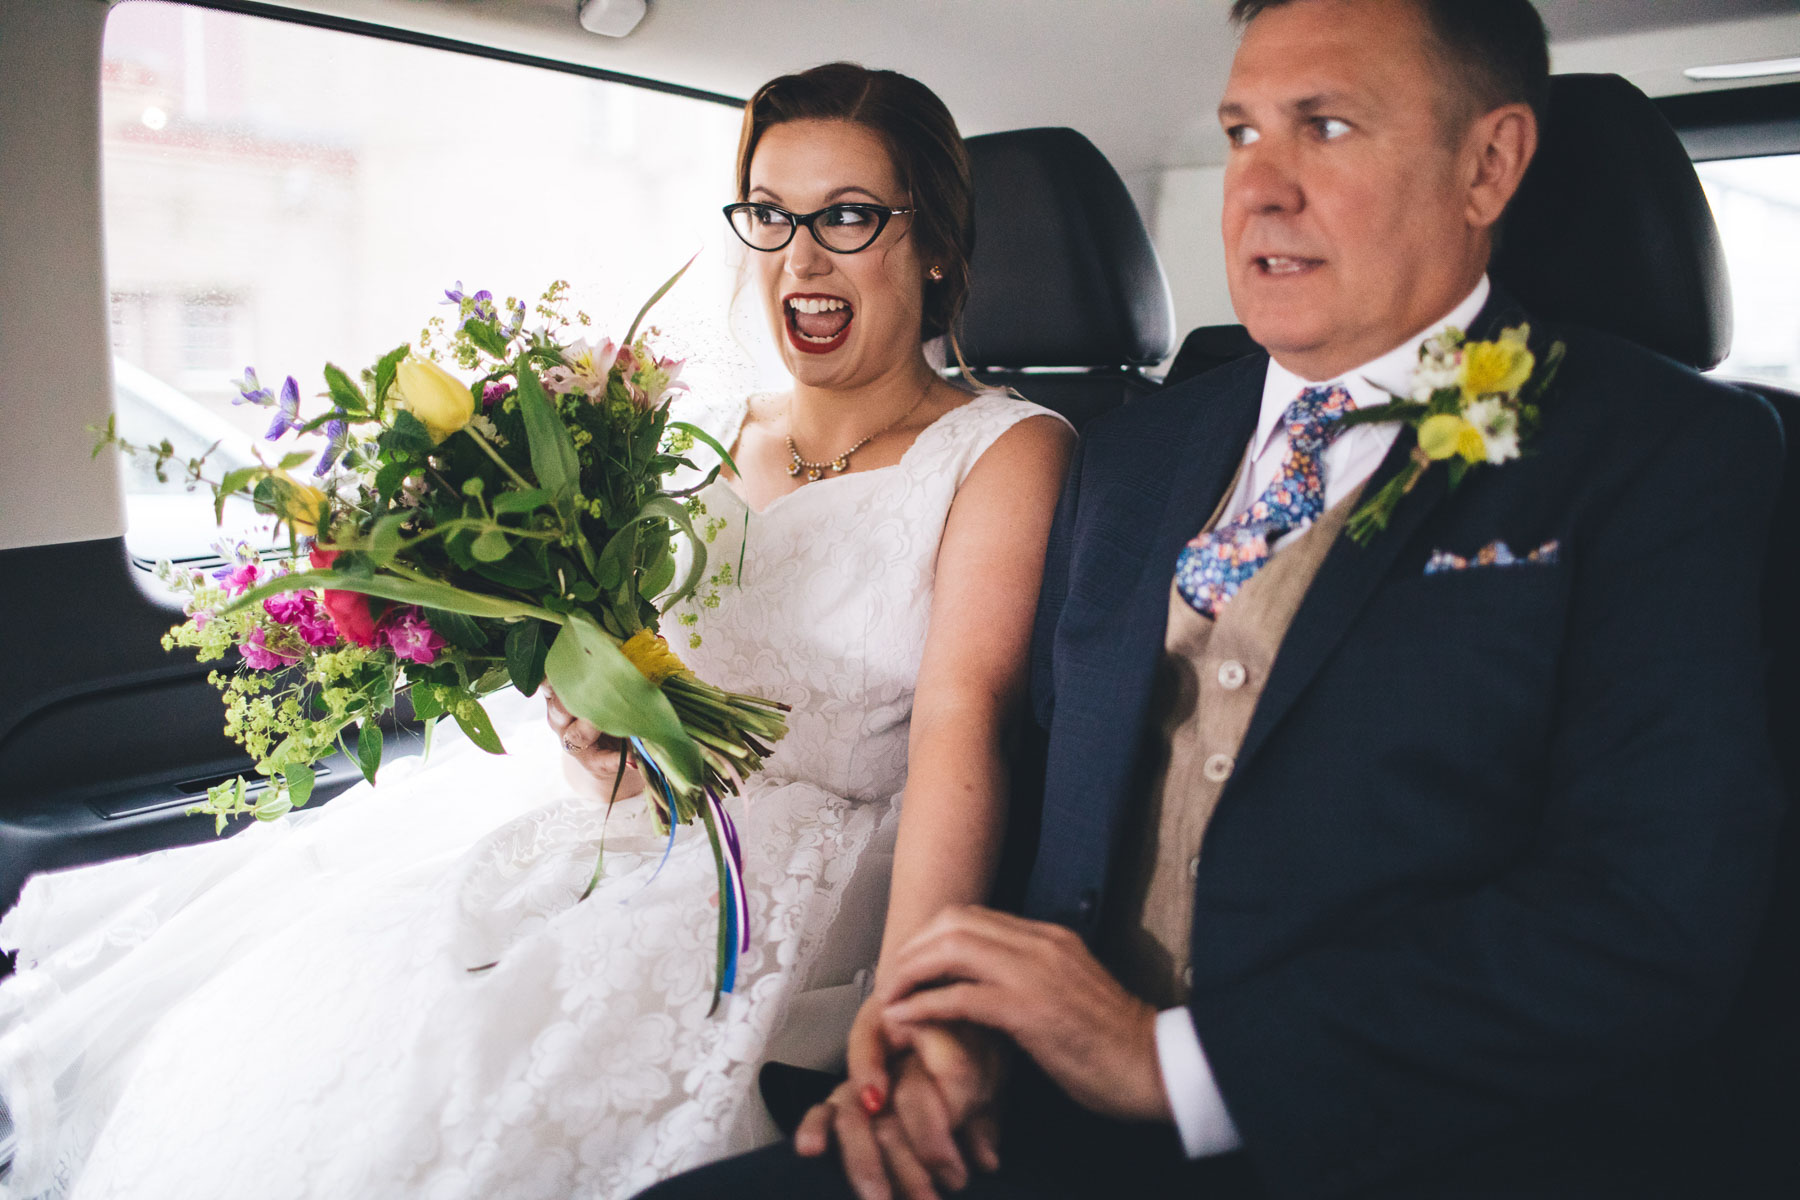 bride looks excited as she arrives with her dad at the wedding